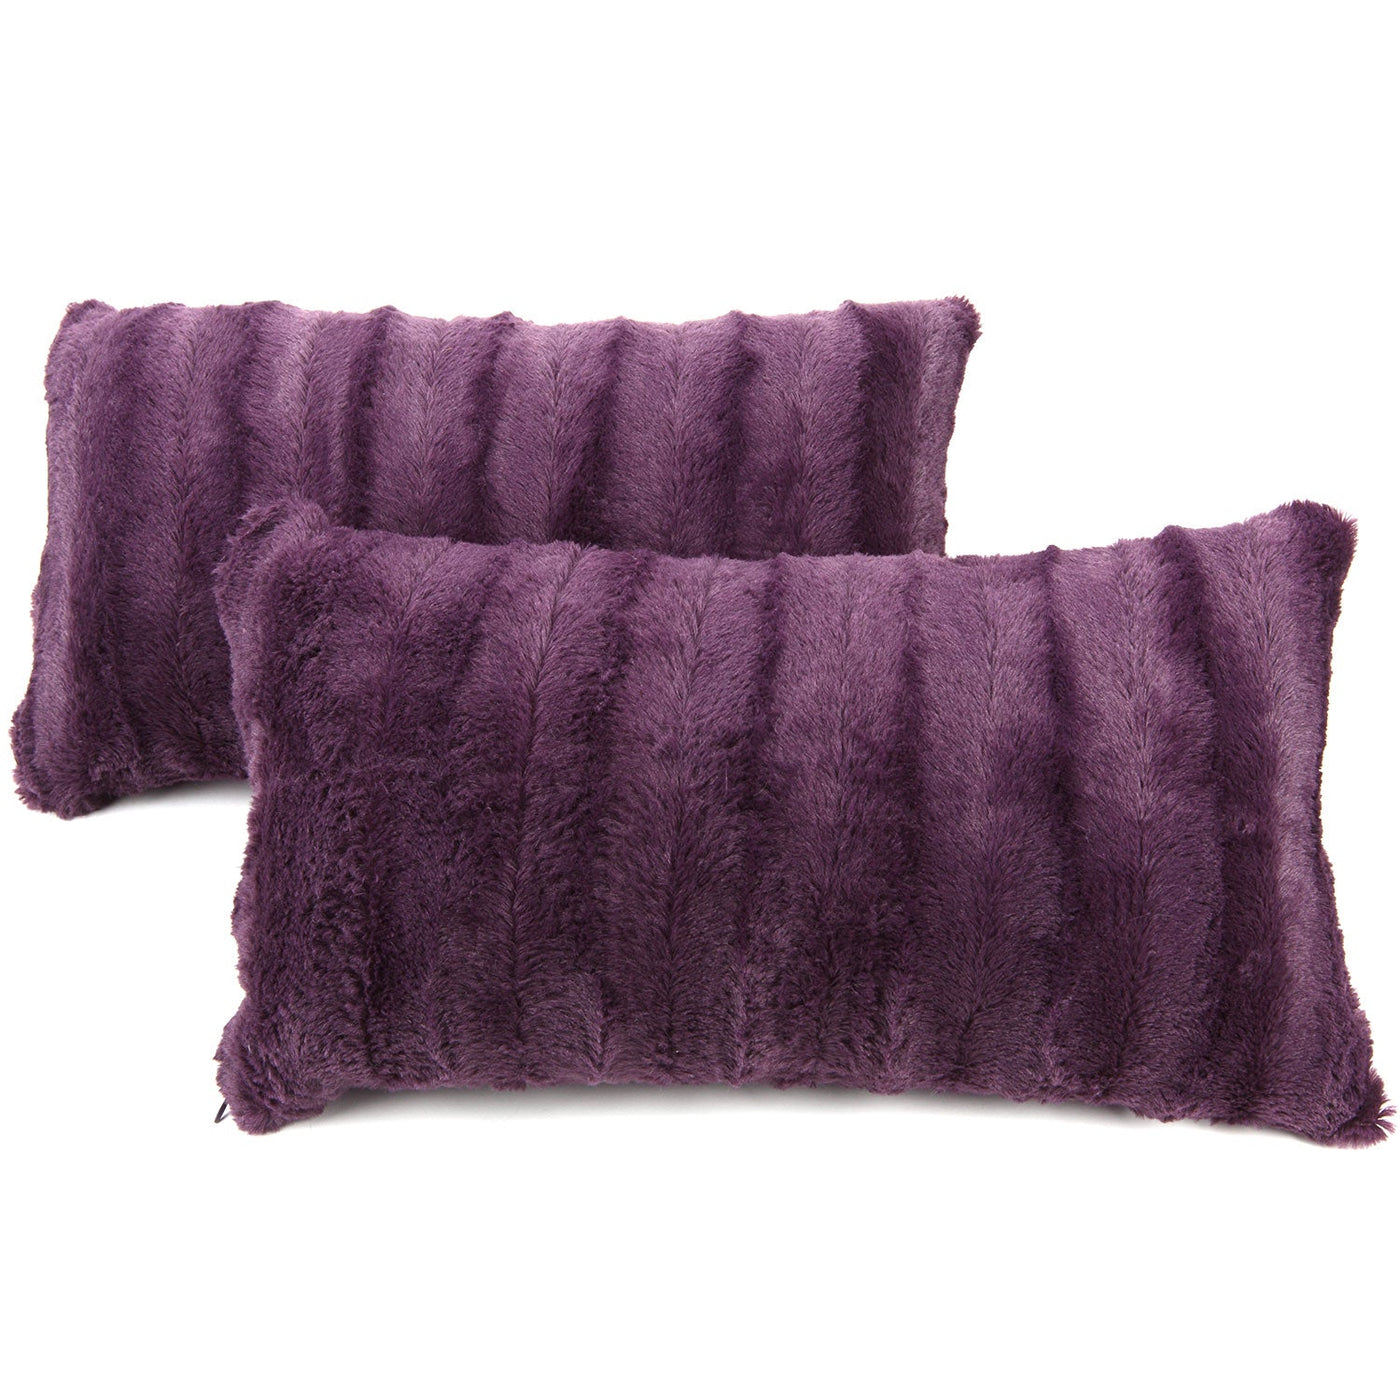 Cheer Collection Shaggy Long Hair Throw Pillows - Super Soft and Plush Faux Fur Lumbar Accent Pillows - Set of 2 - Purple - 12 x 20 in